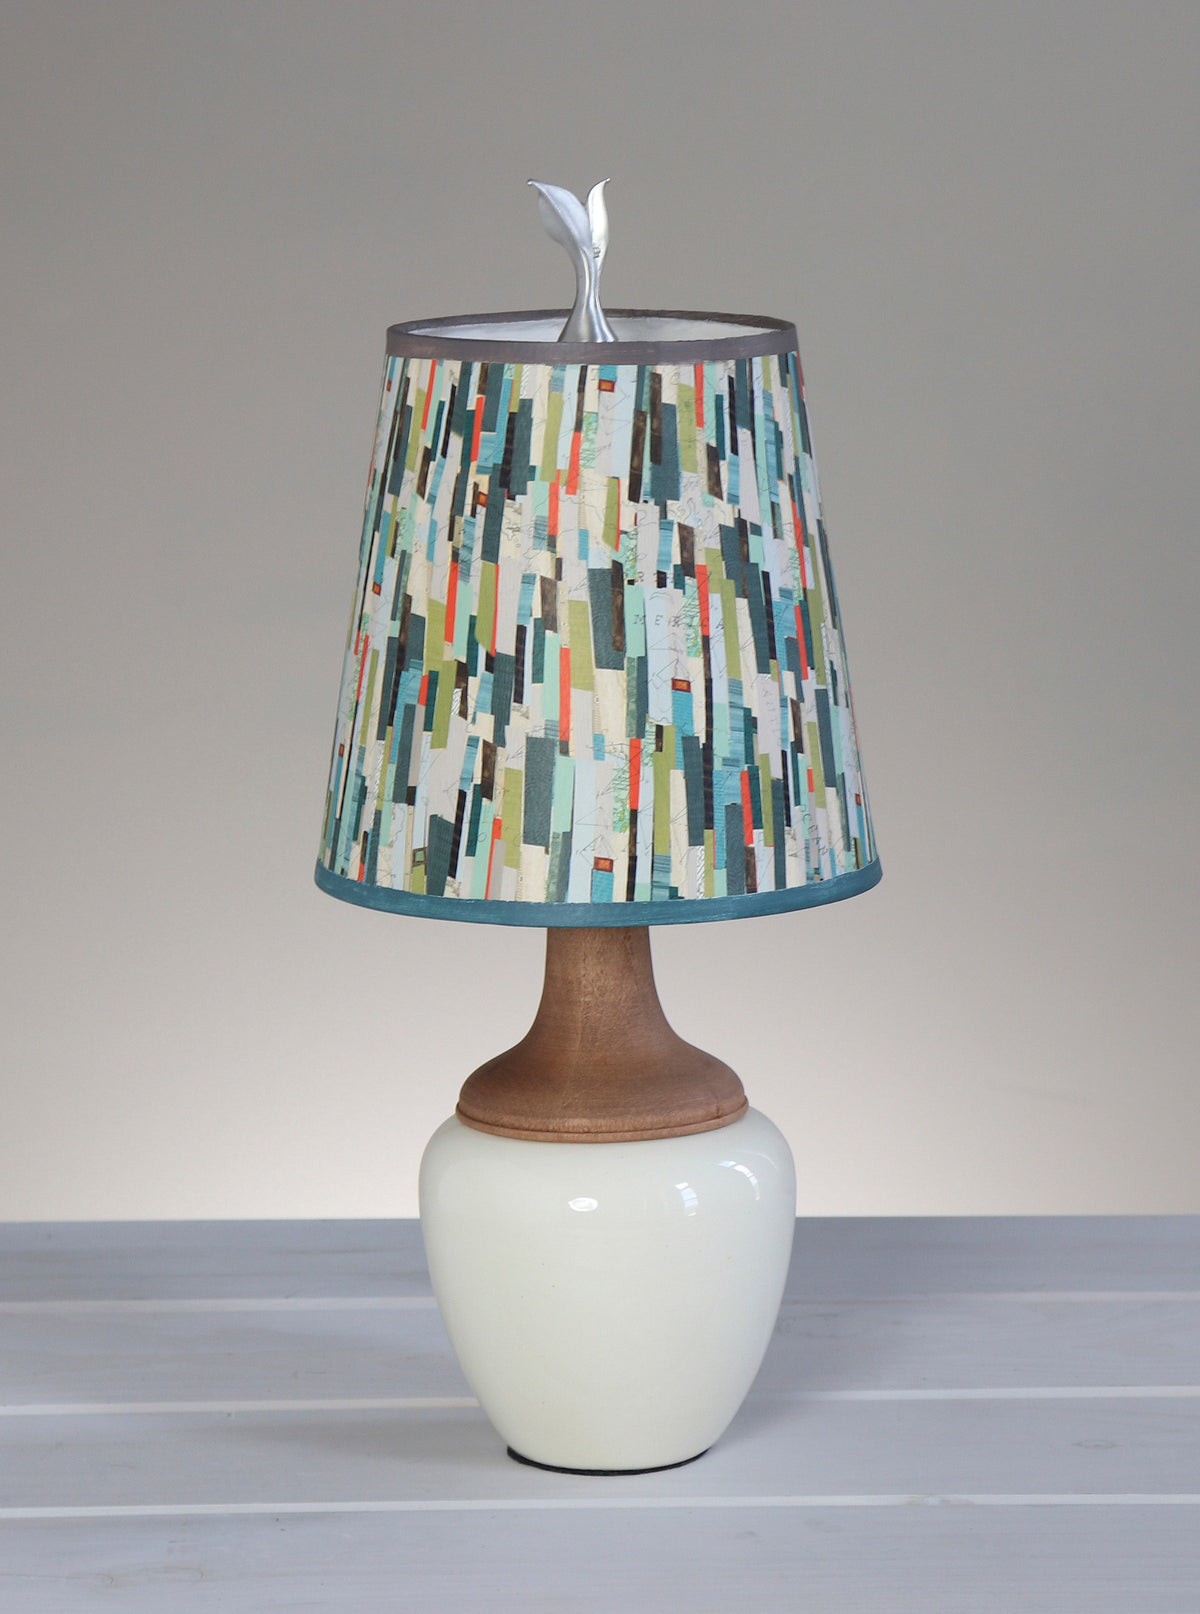 Janna Ugone &amp; Co Table Lamps Ceramic and Maple Table Lamp in Ivory Gloss with Small Drum Shade in Papers